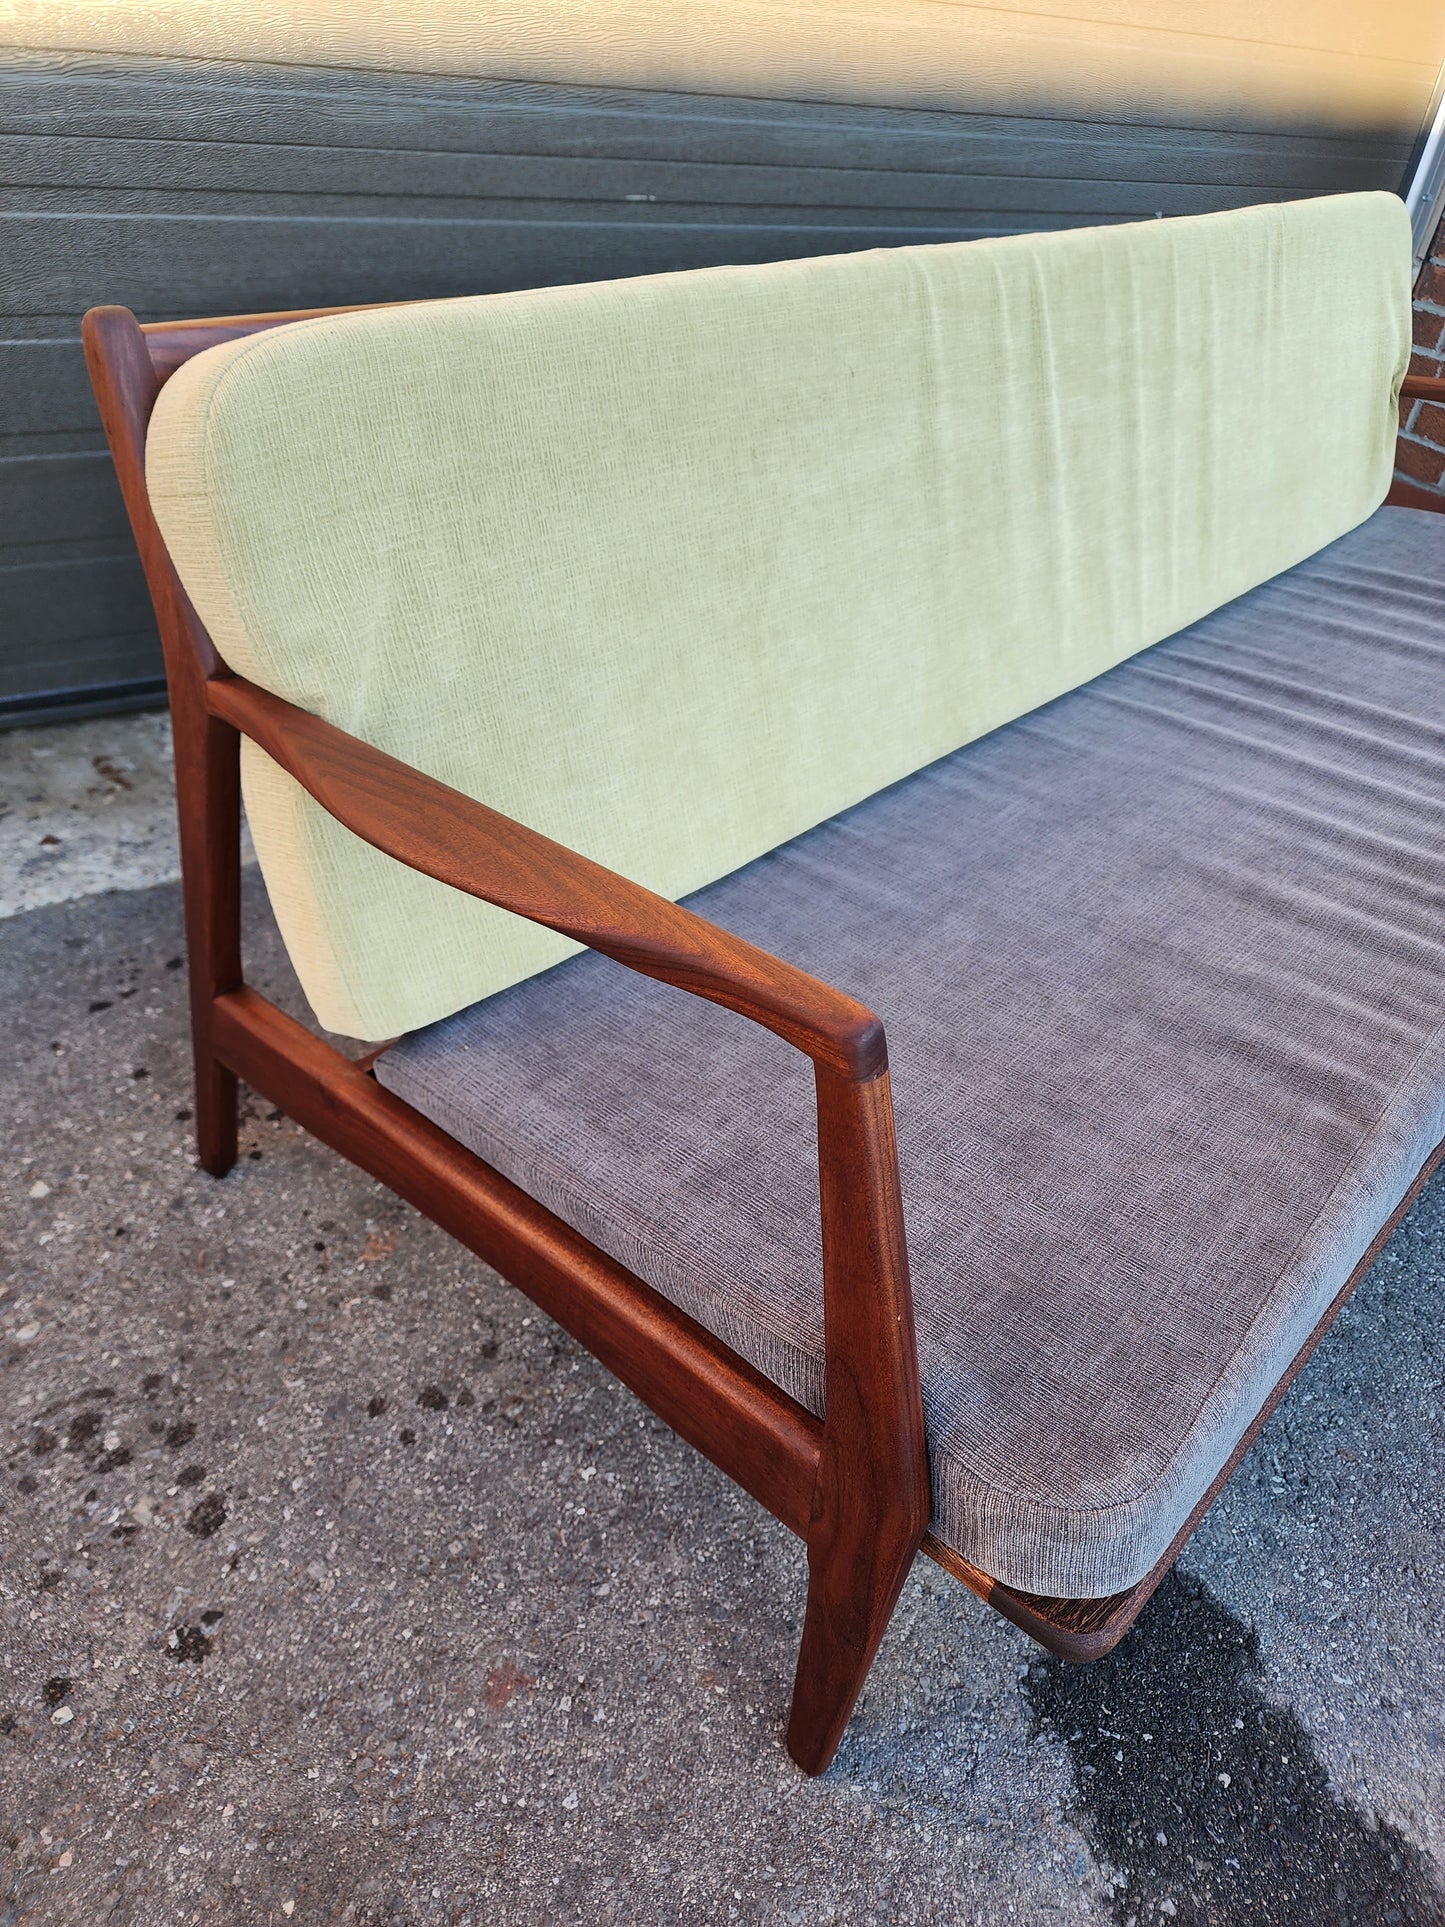 REFINISHED Mid Century Modern Teak 3-Seater Sofa by R. Huber will get NEW CUSHIONS